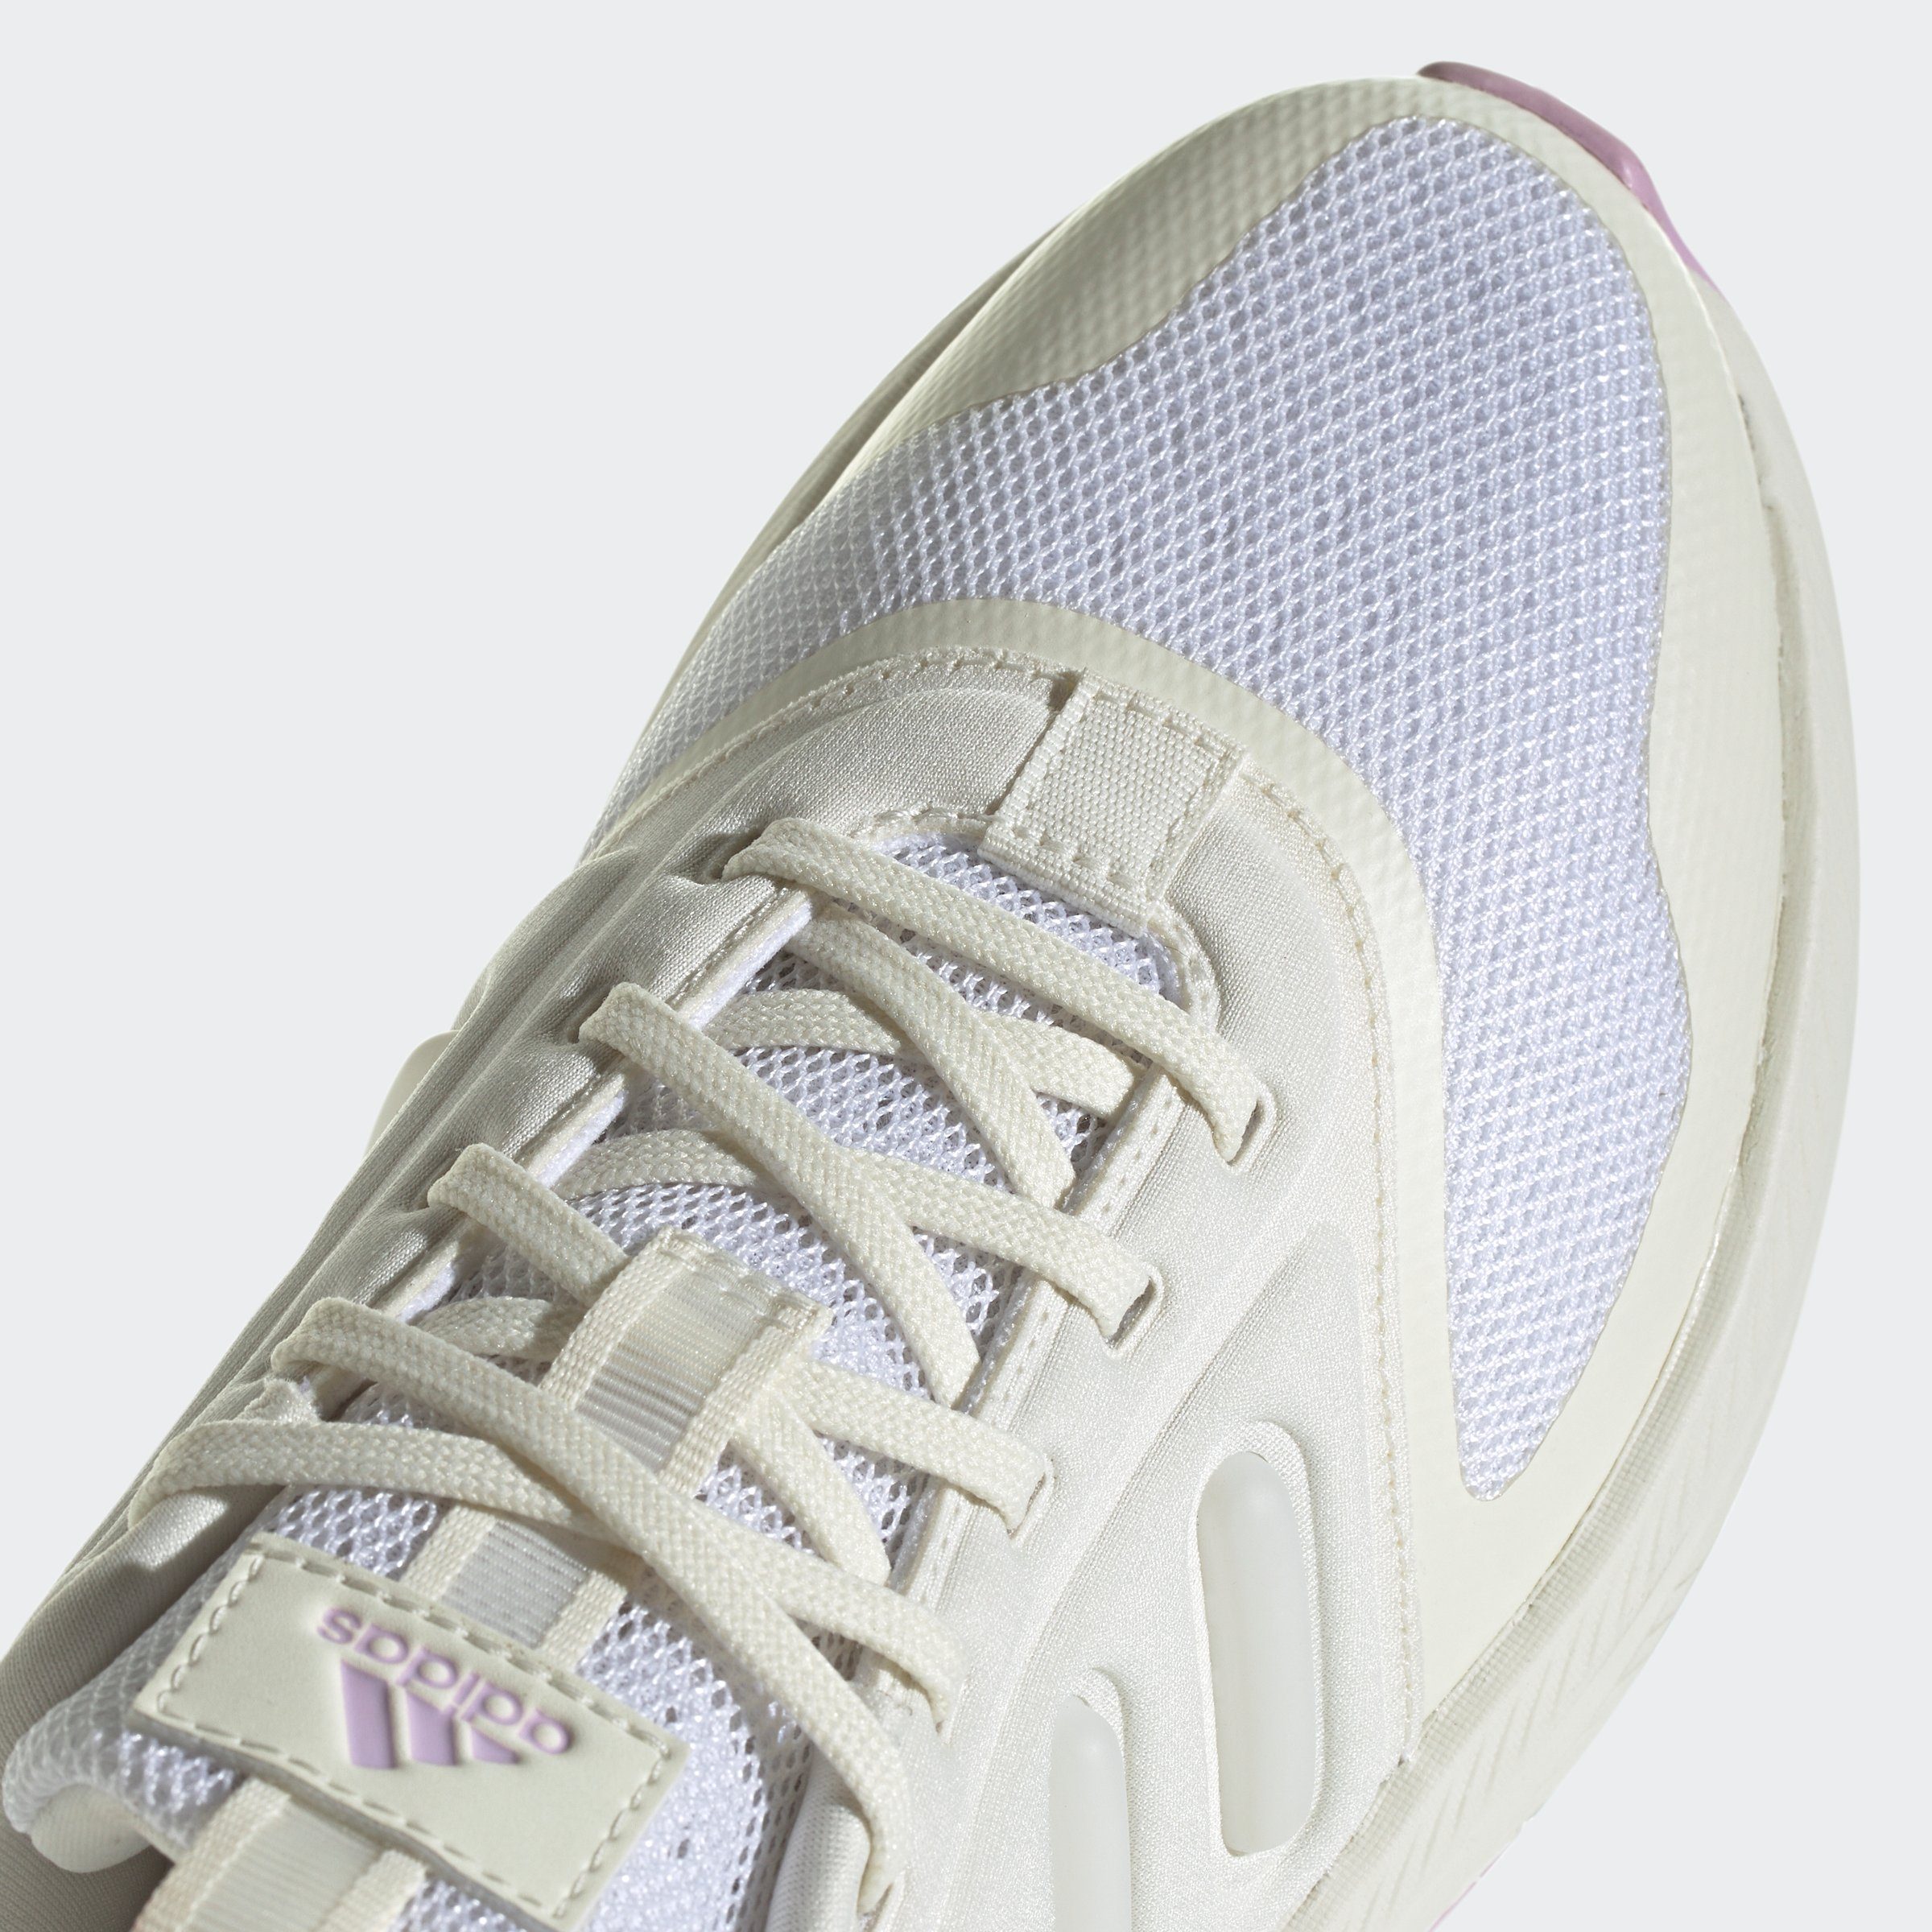 adidas Sportswear X_PLR PHASE Off White / Lilac Bliss / Sneaker White Off